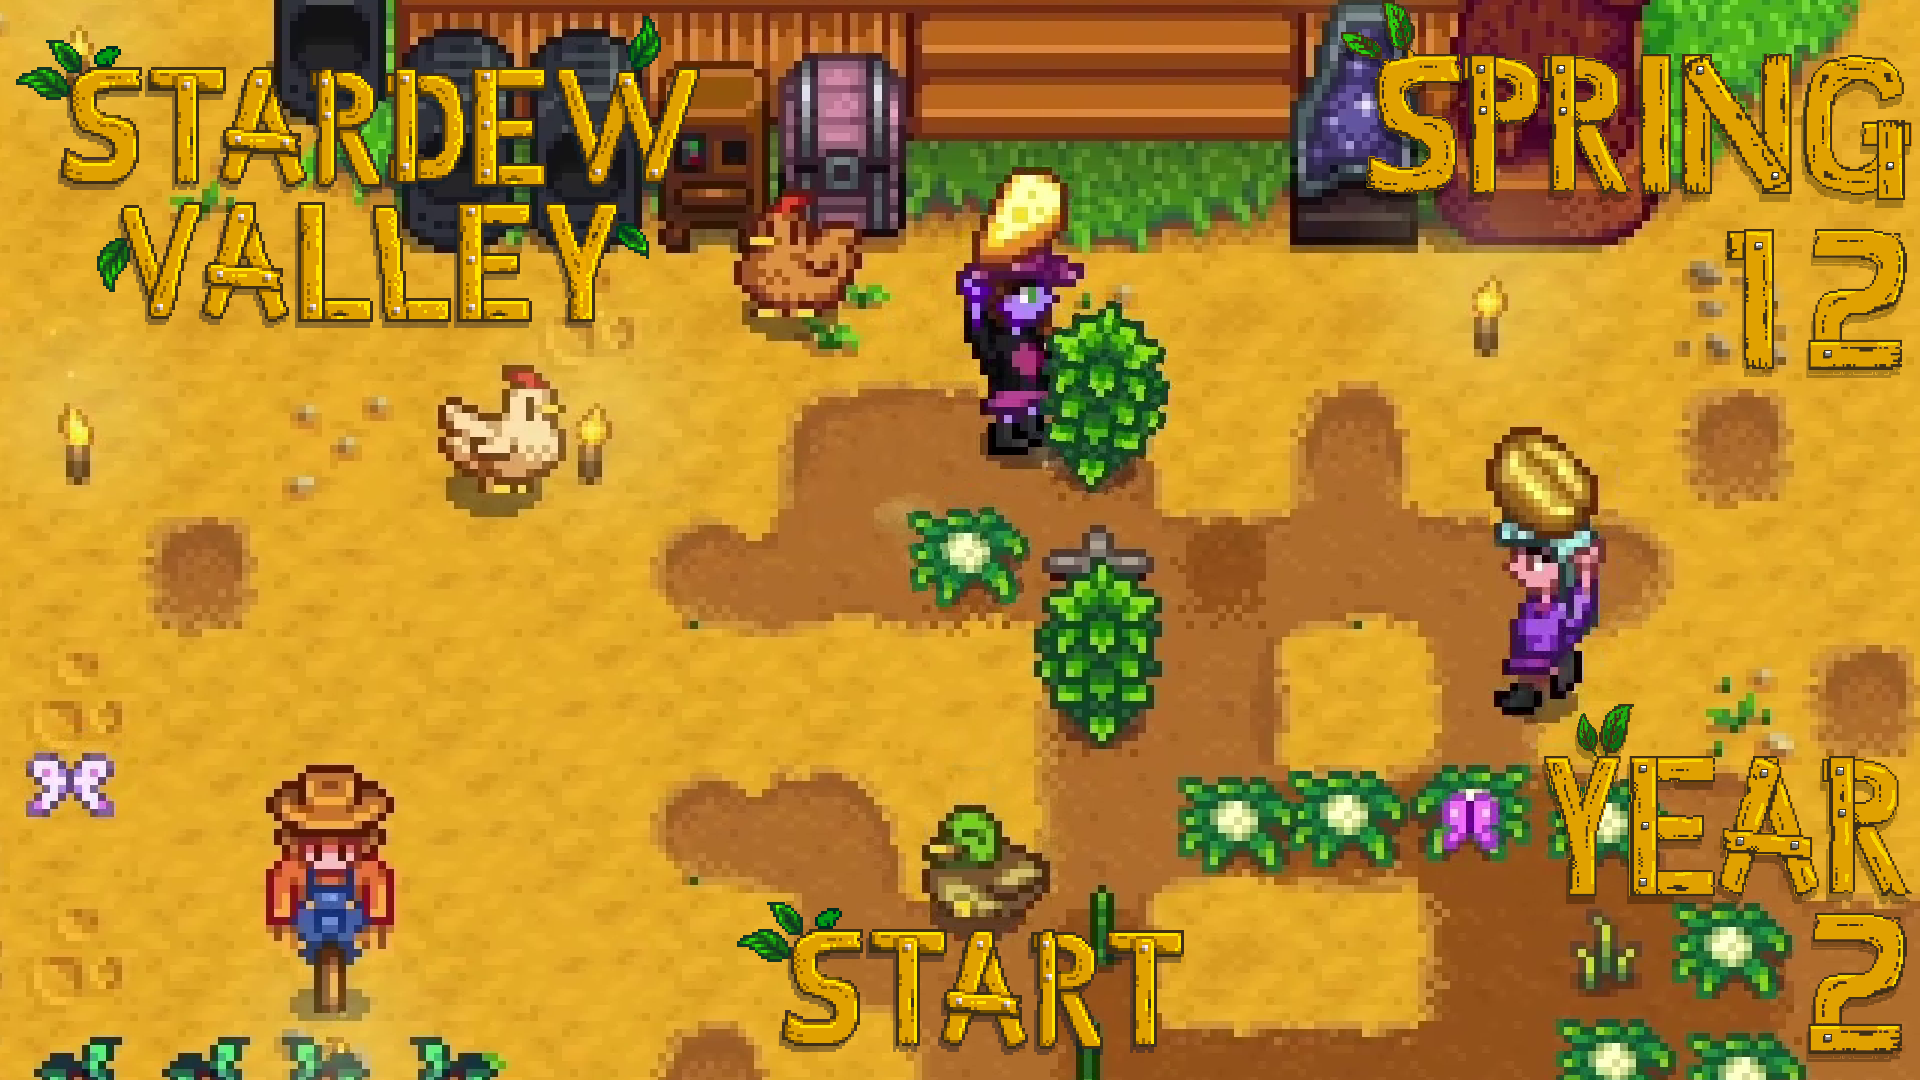 Not For Human Consumption – Stardew Valley, Spring 12, Year 2, Start